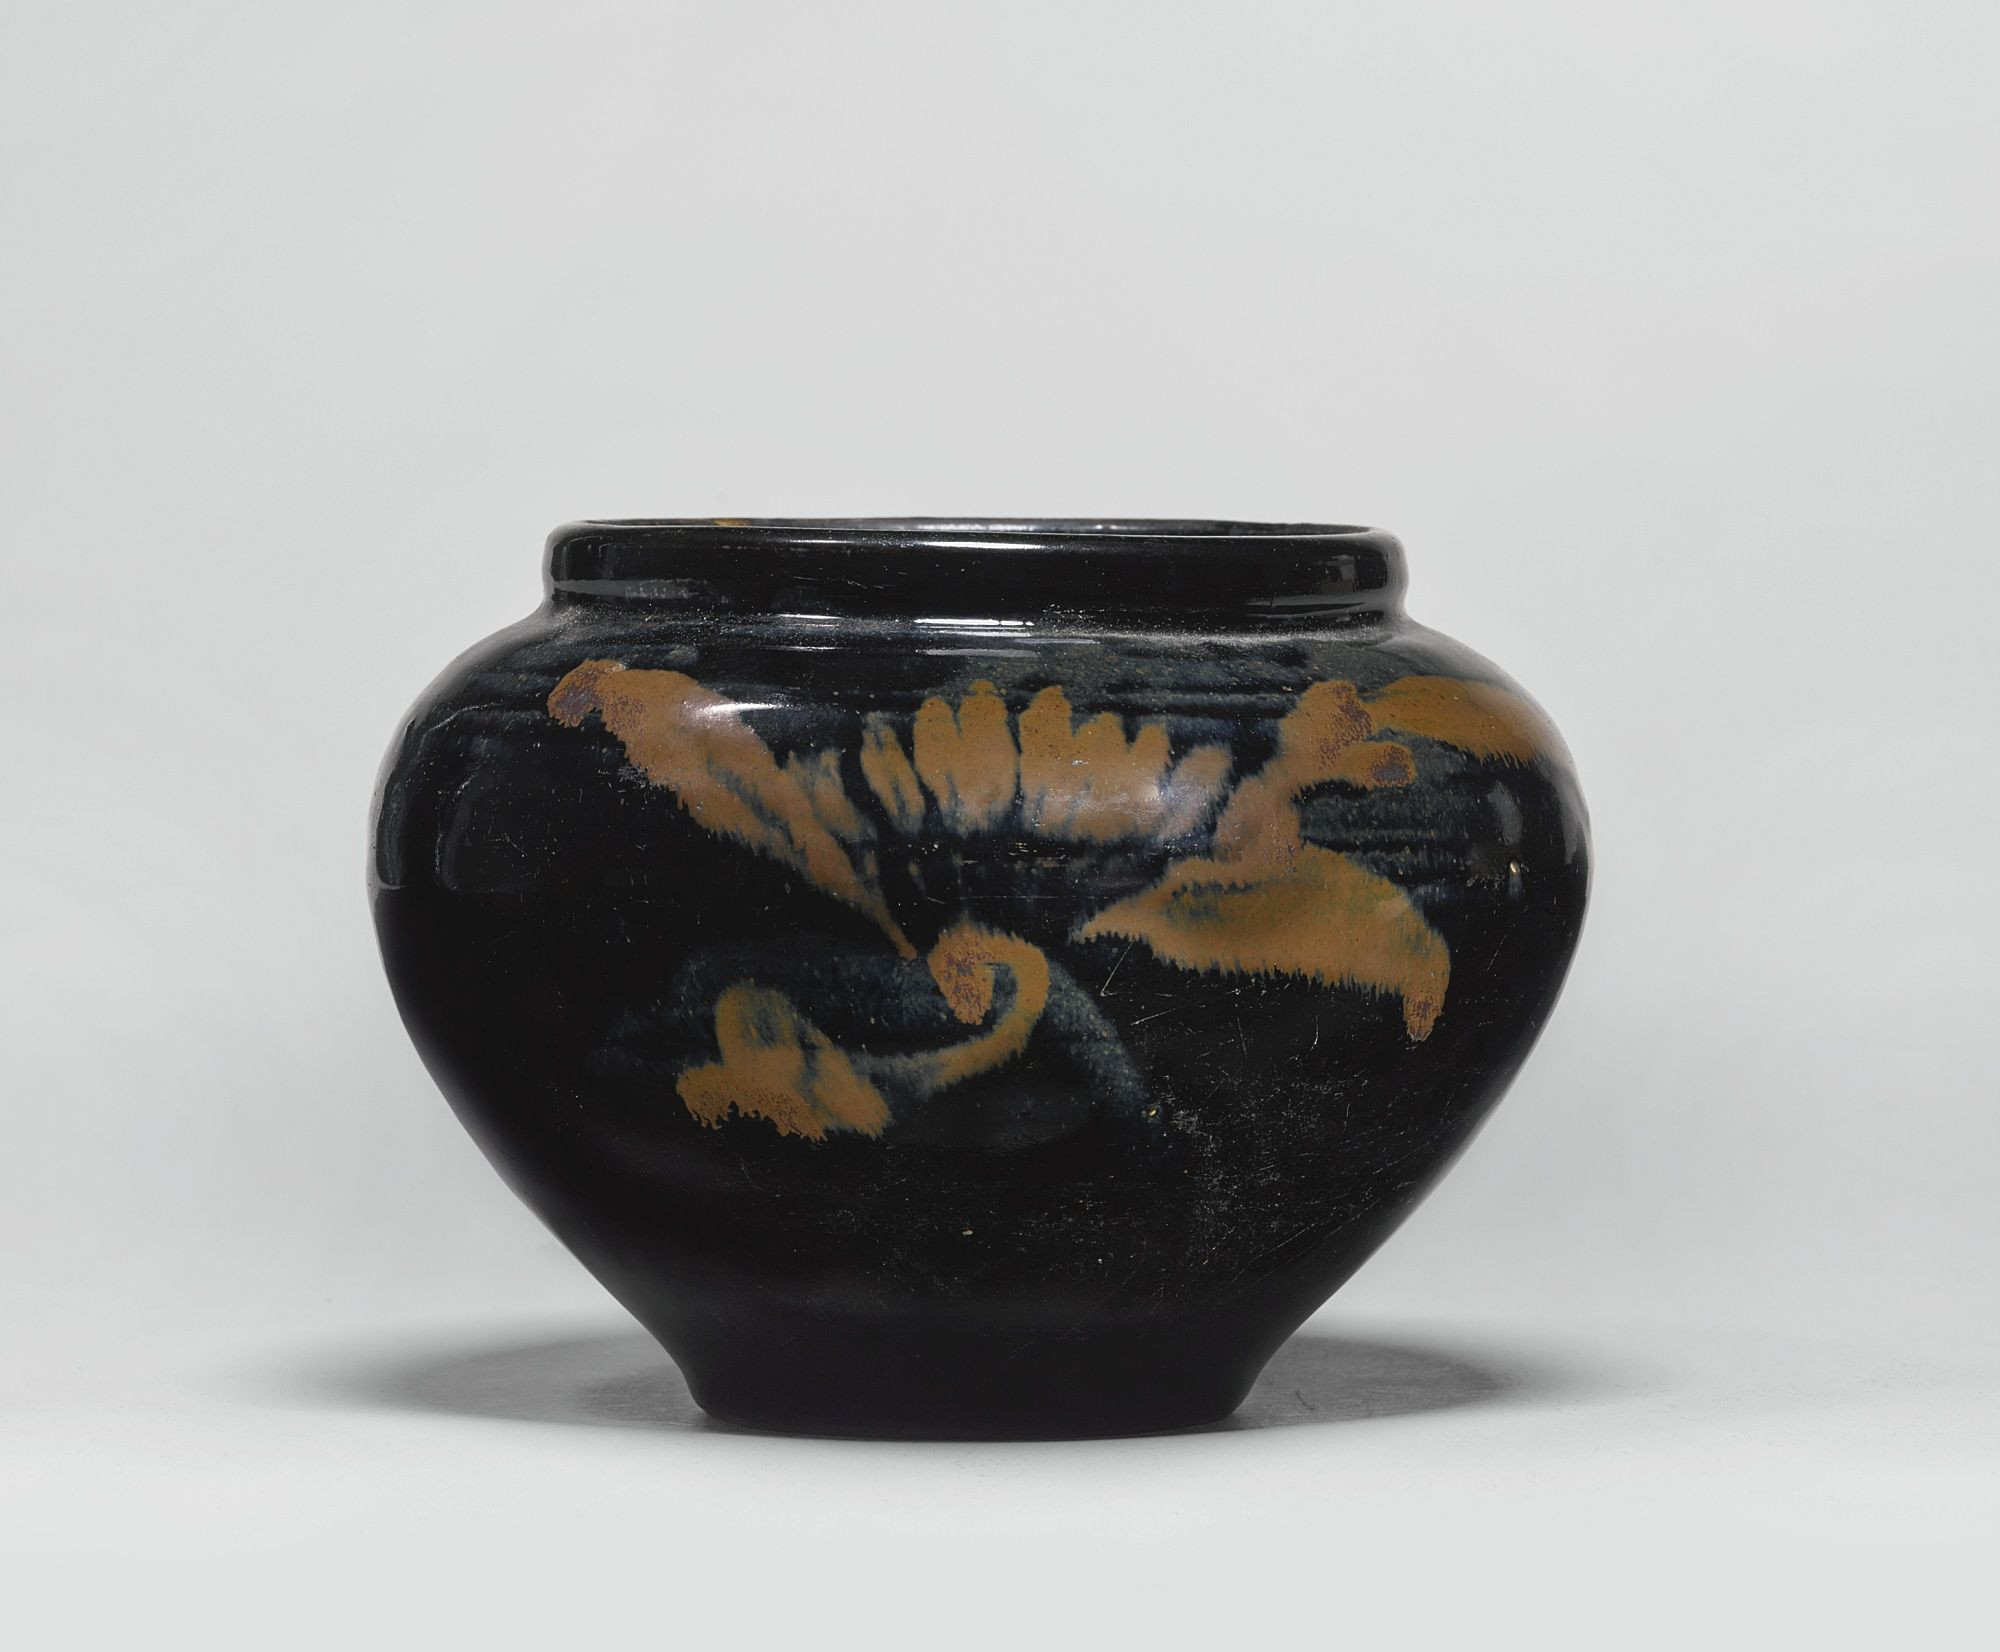 24 Famous song Dynasty Vase 2024 free download song dynasty vase of a black glazed and russet jar song dynasty ec291ec287c289ec28ac2b9ec28ac2b1 pinterest with regard to a black glazed and russet jar song dynasty